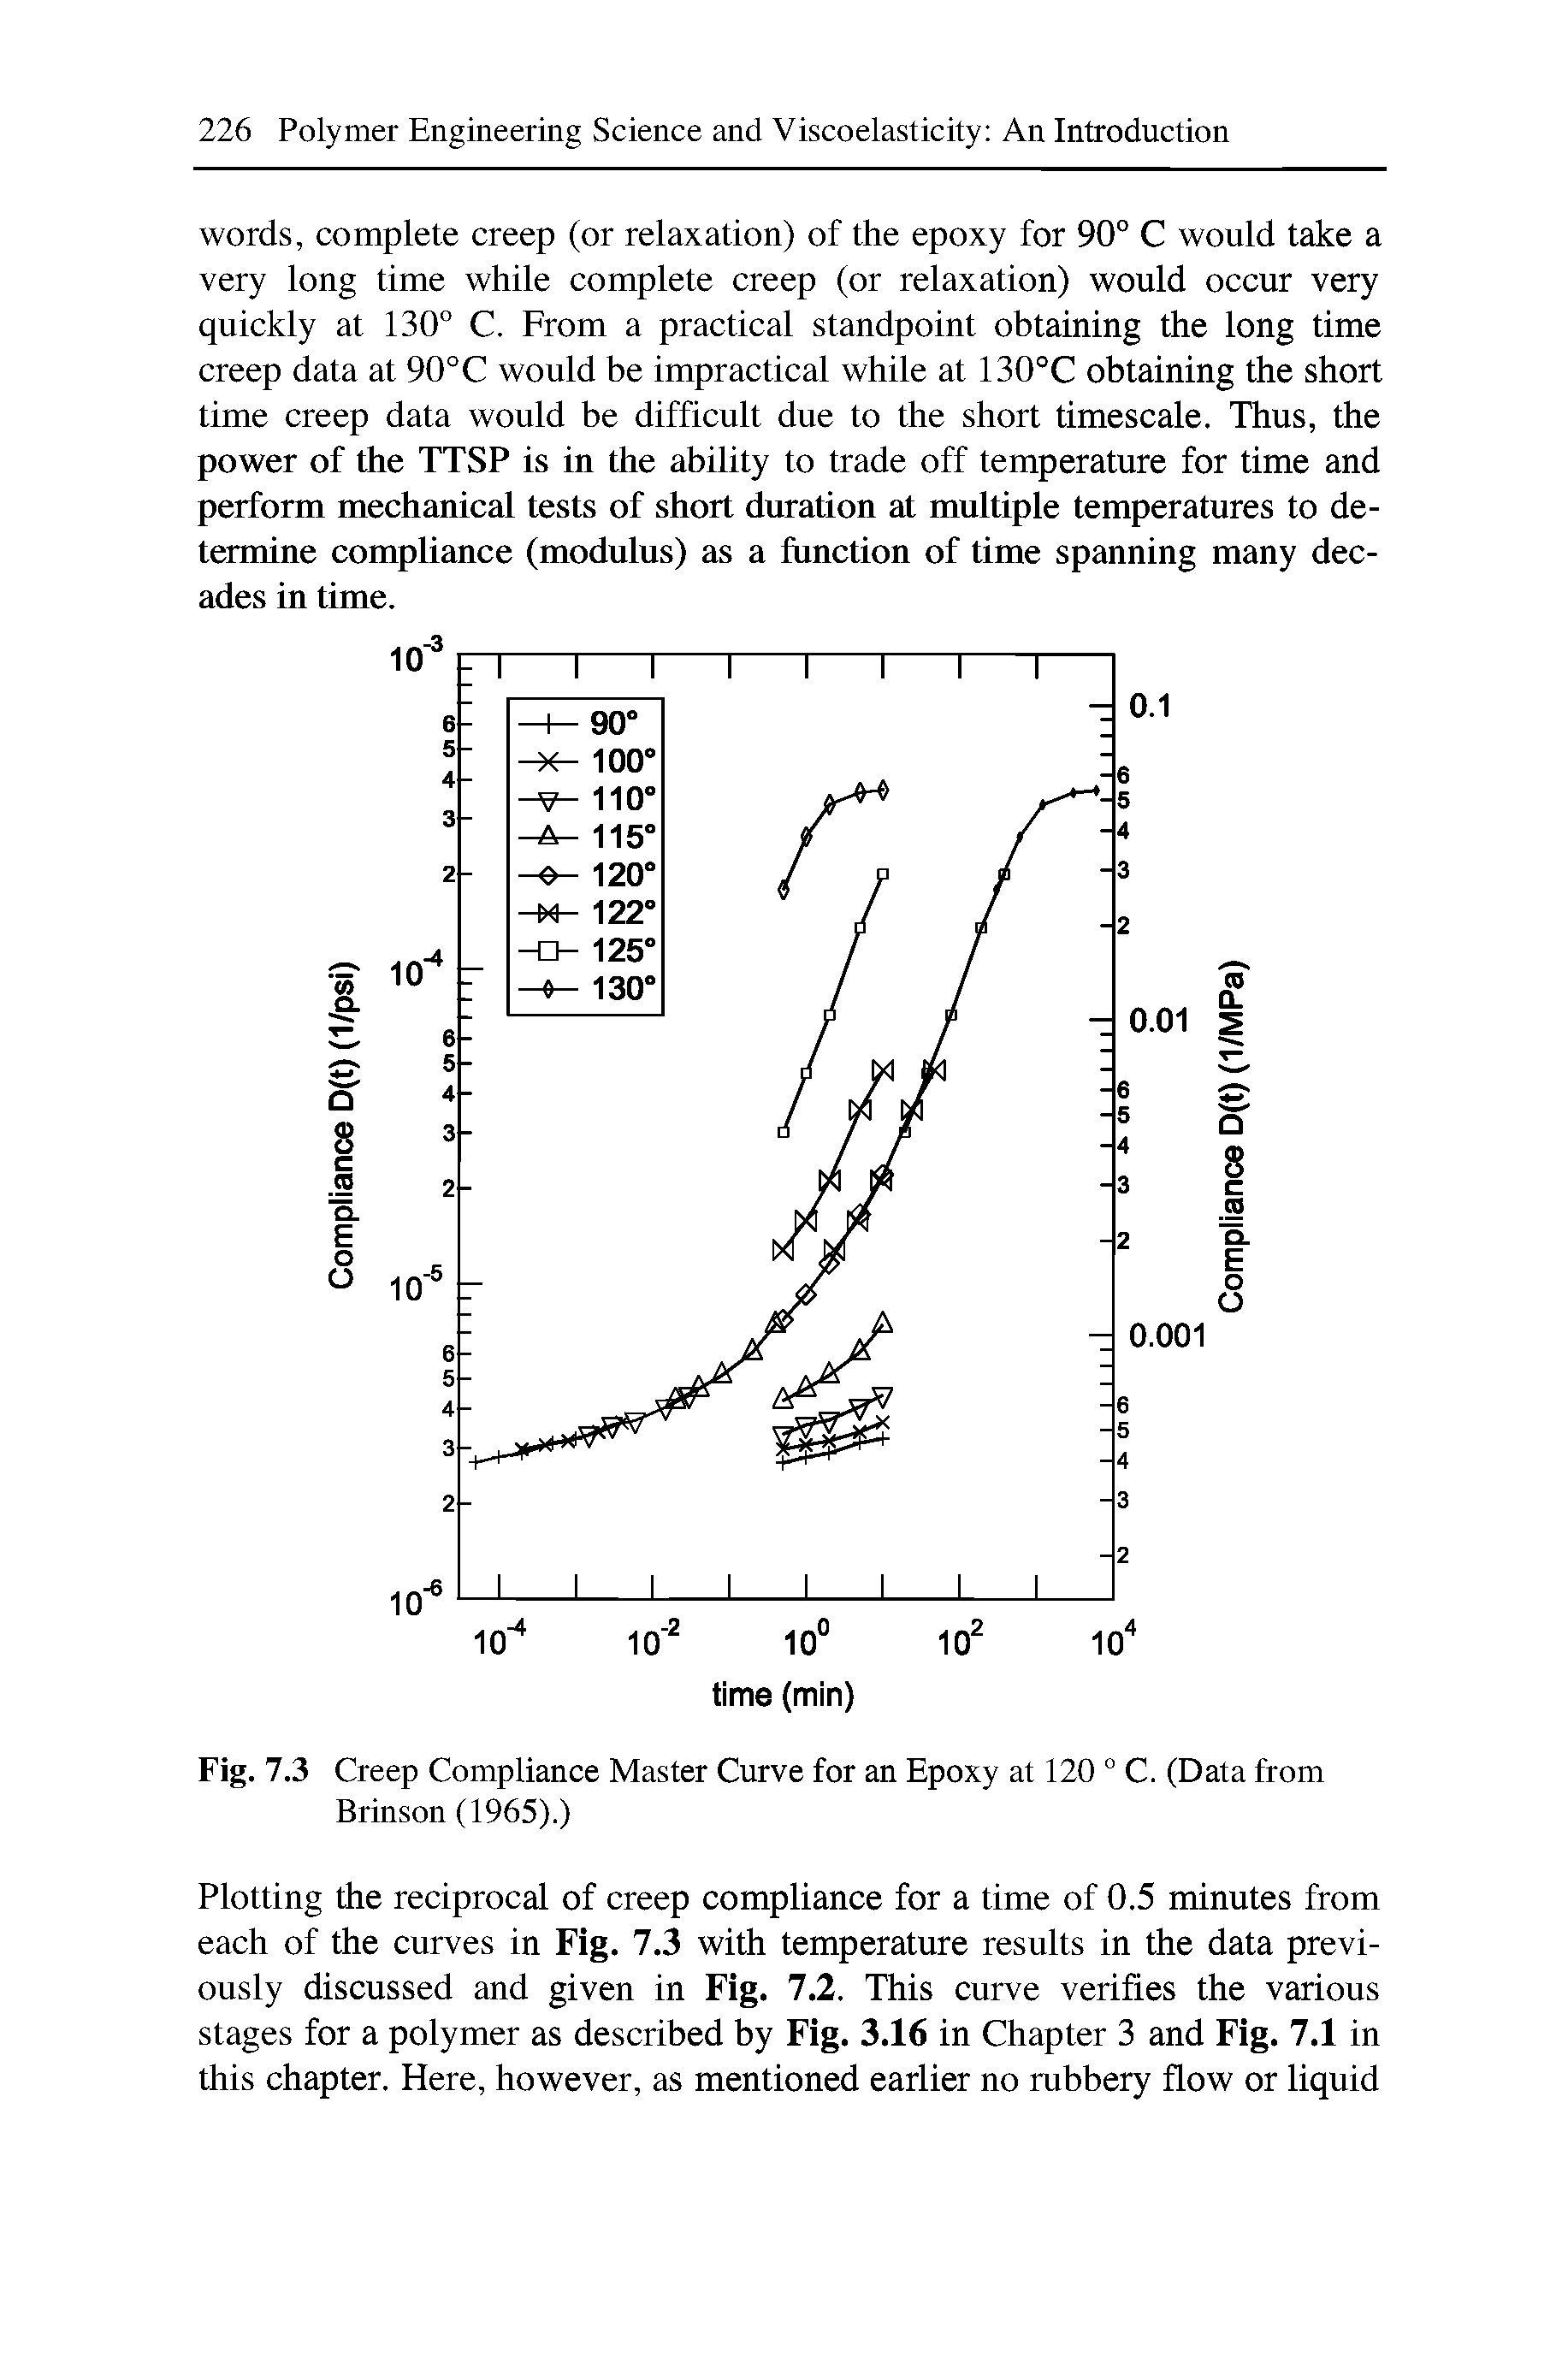 Fig. 7.3 Creep Compliance Master Curve for an Epoxy at 120 ° C. (Data from Brinson (1965).)...